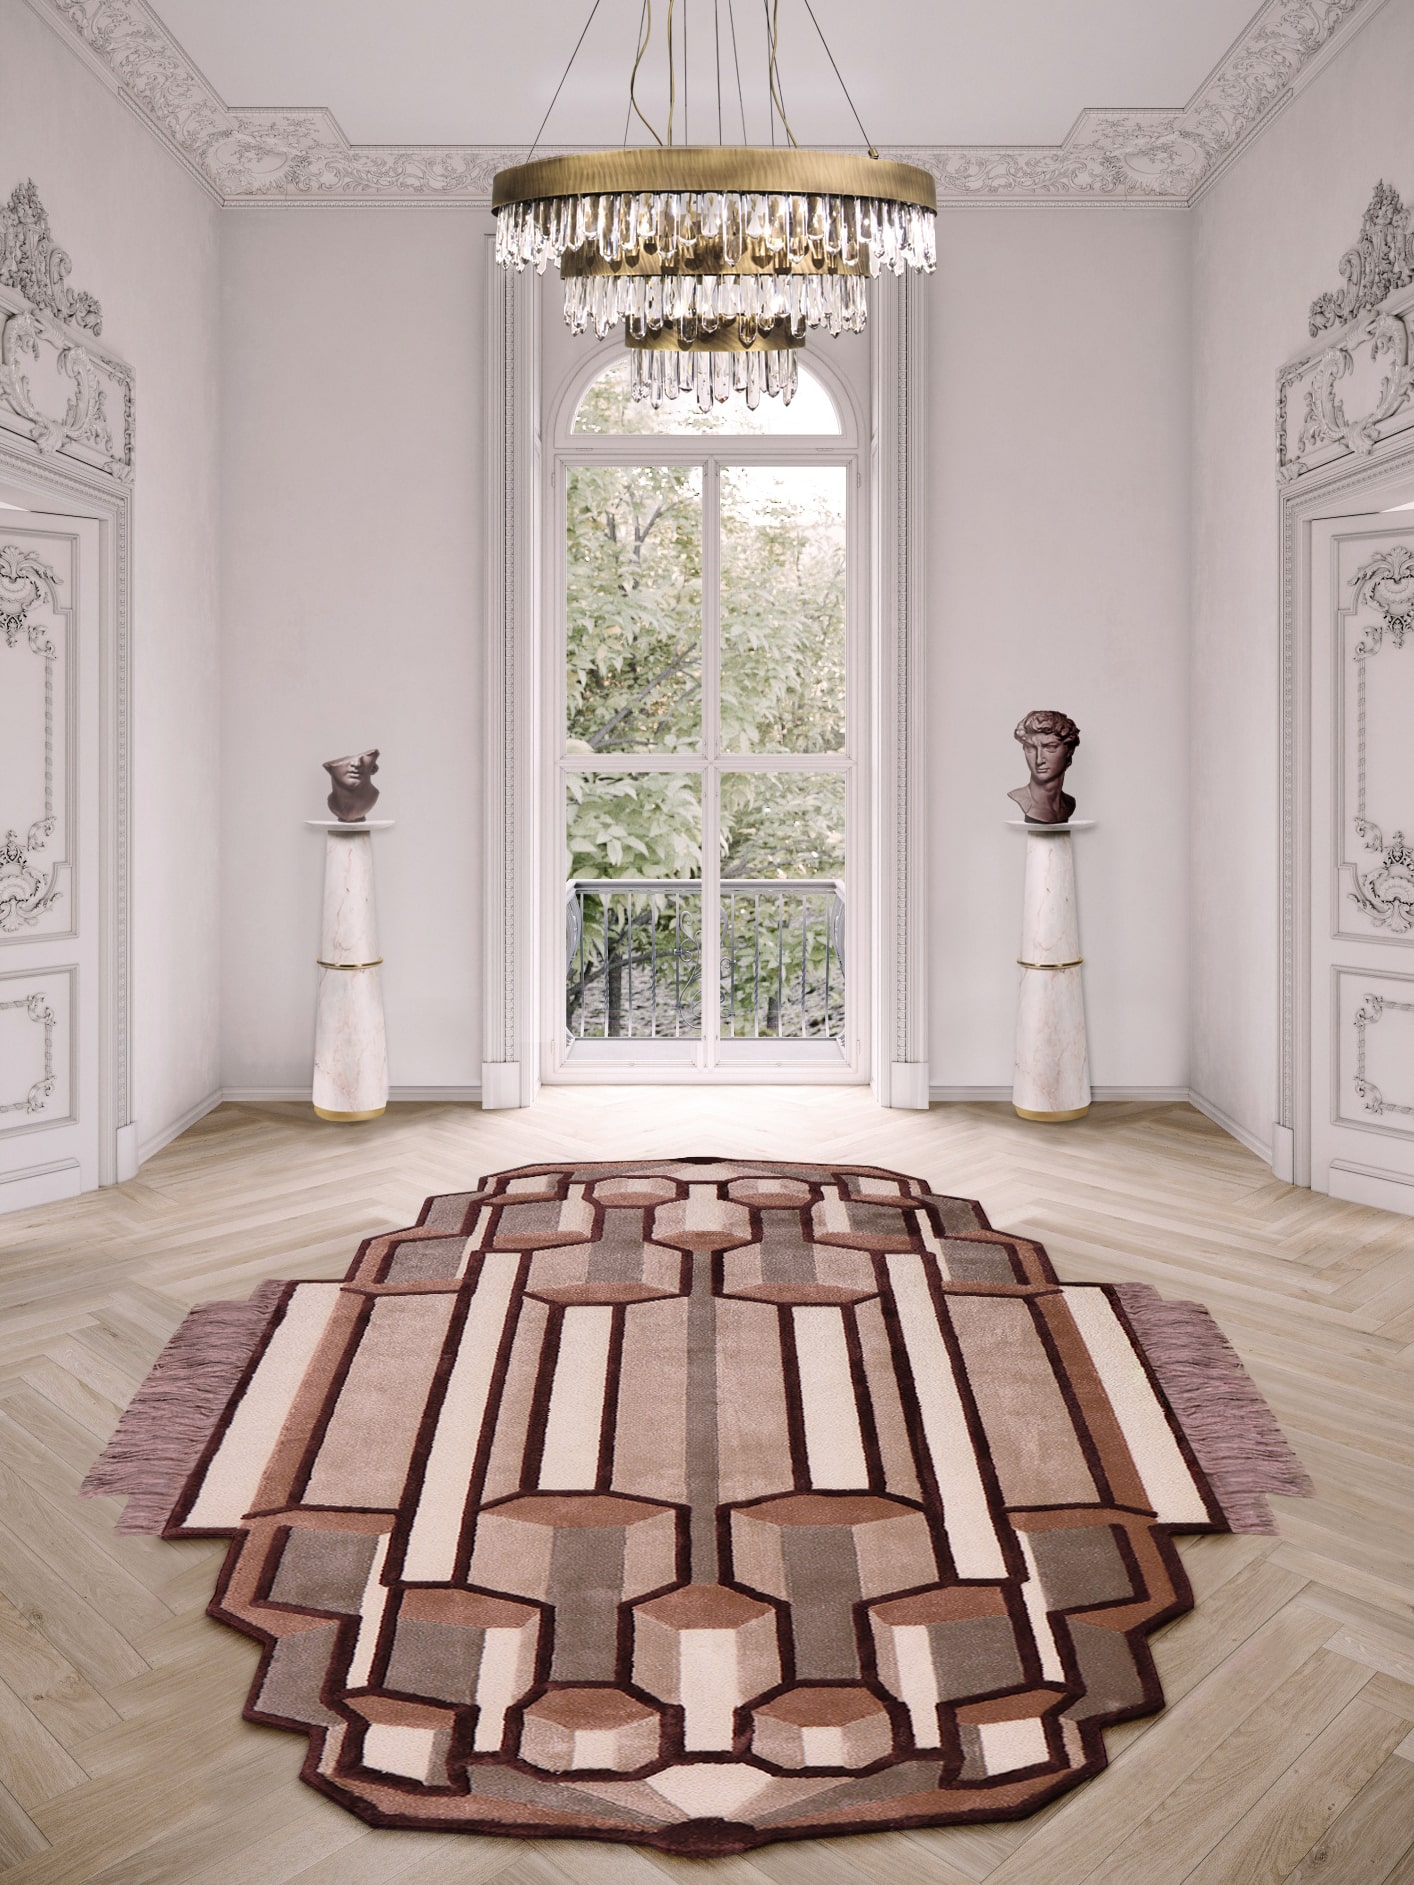 Classical Home Entryway With Classic Lines And Geometric Patterns - Home'Society